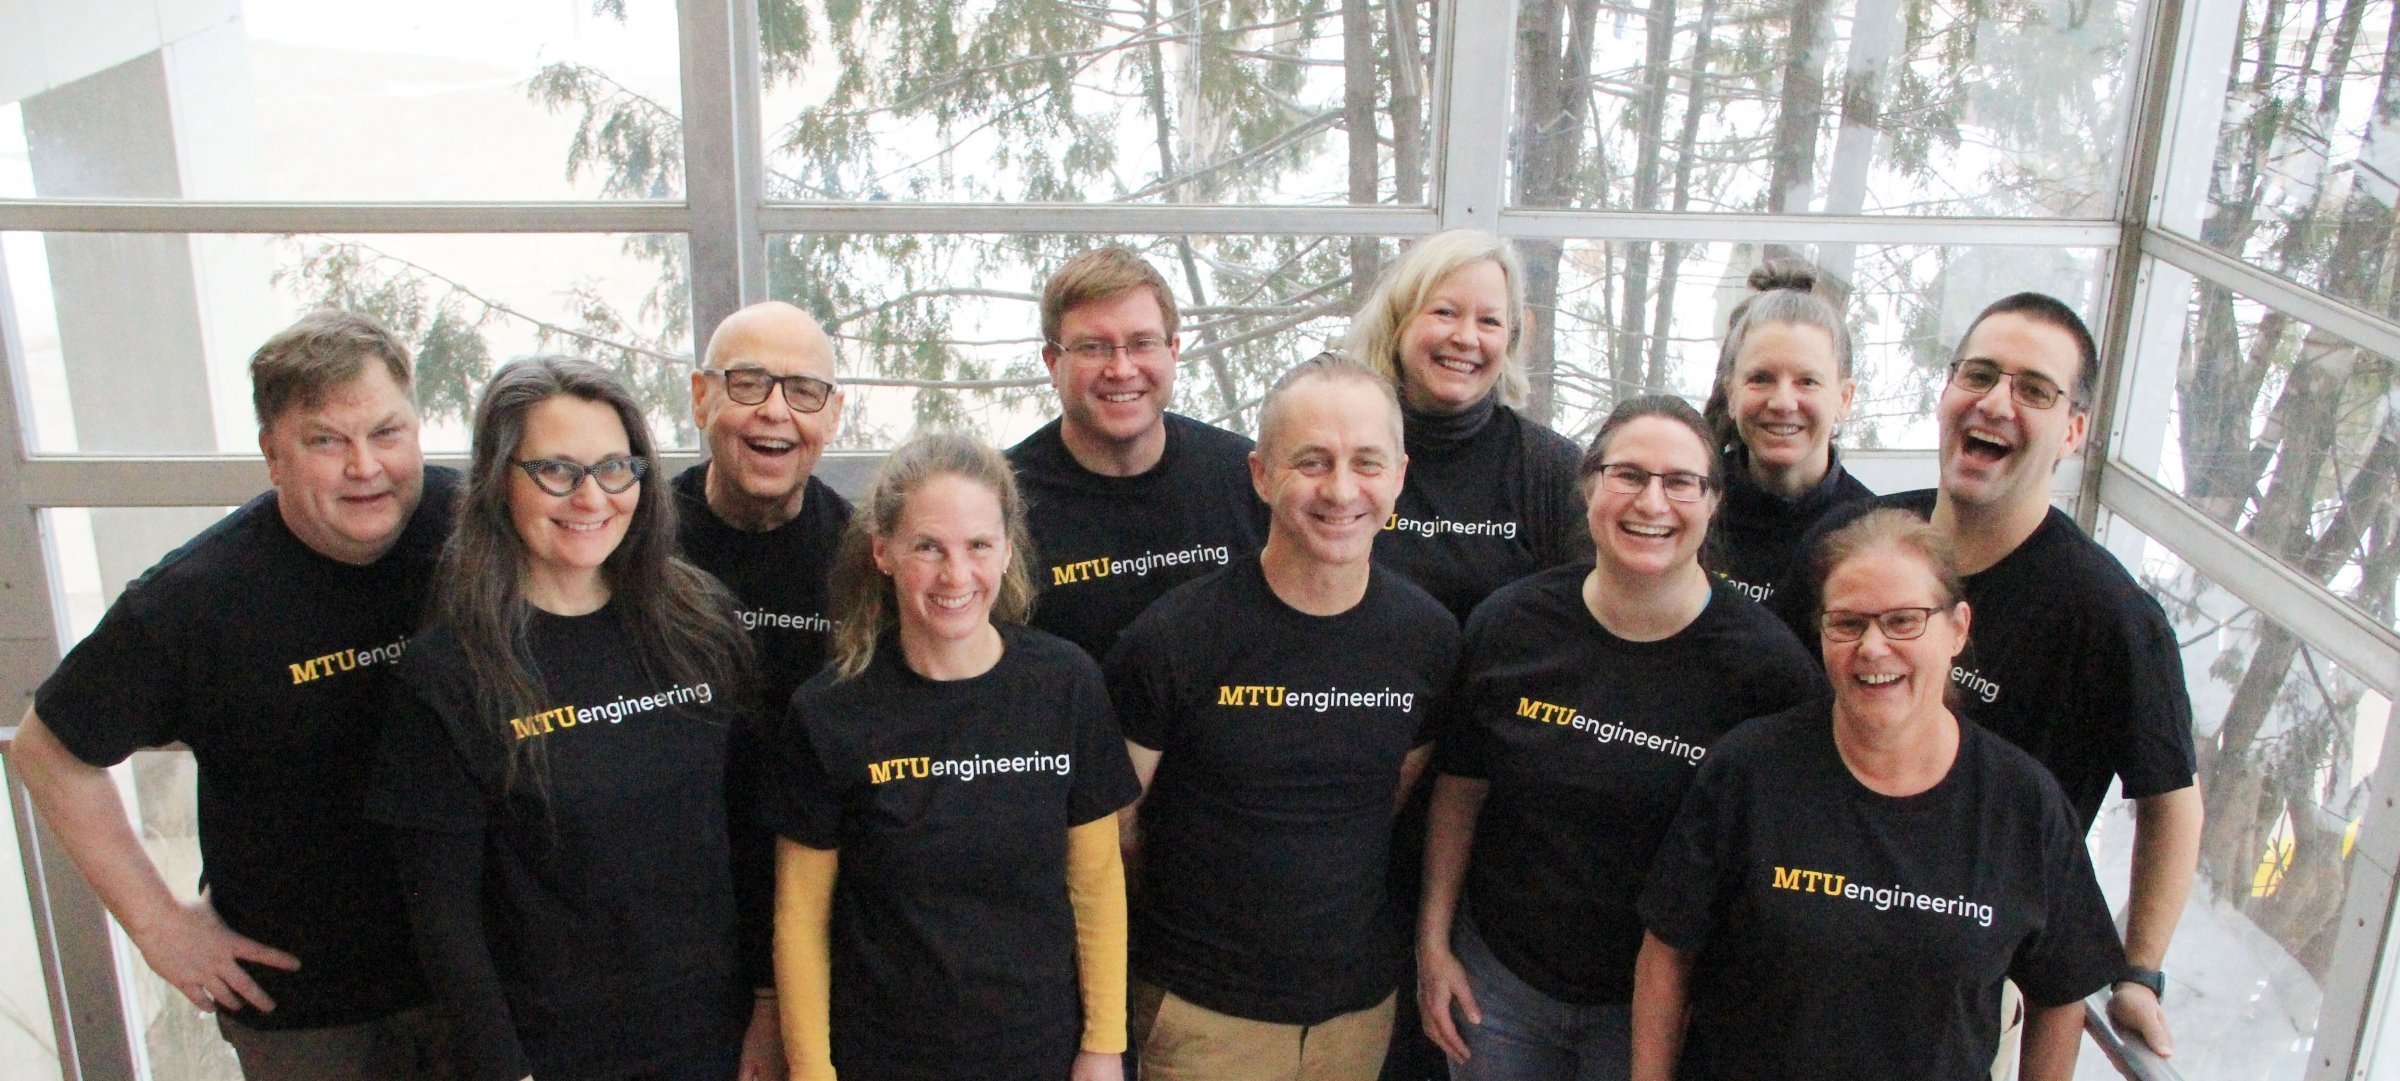 Eleven faculty and staff pose with MTUengineering T-shirts.